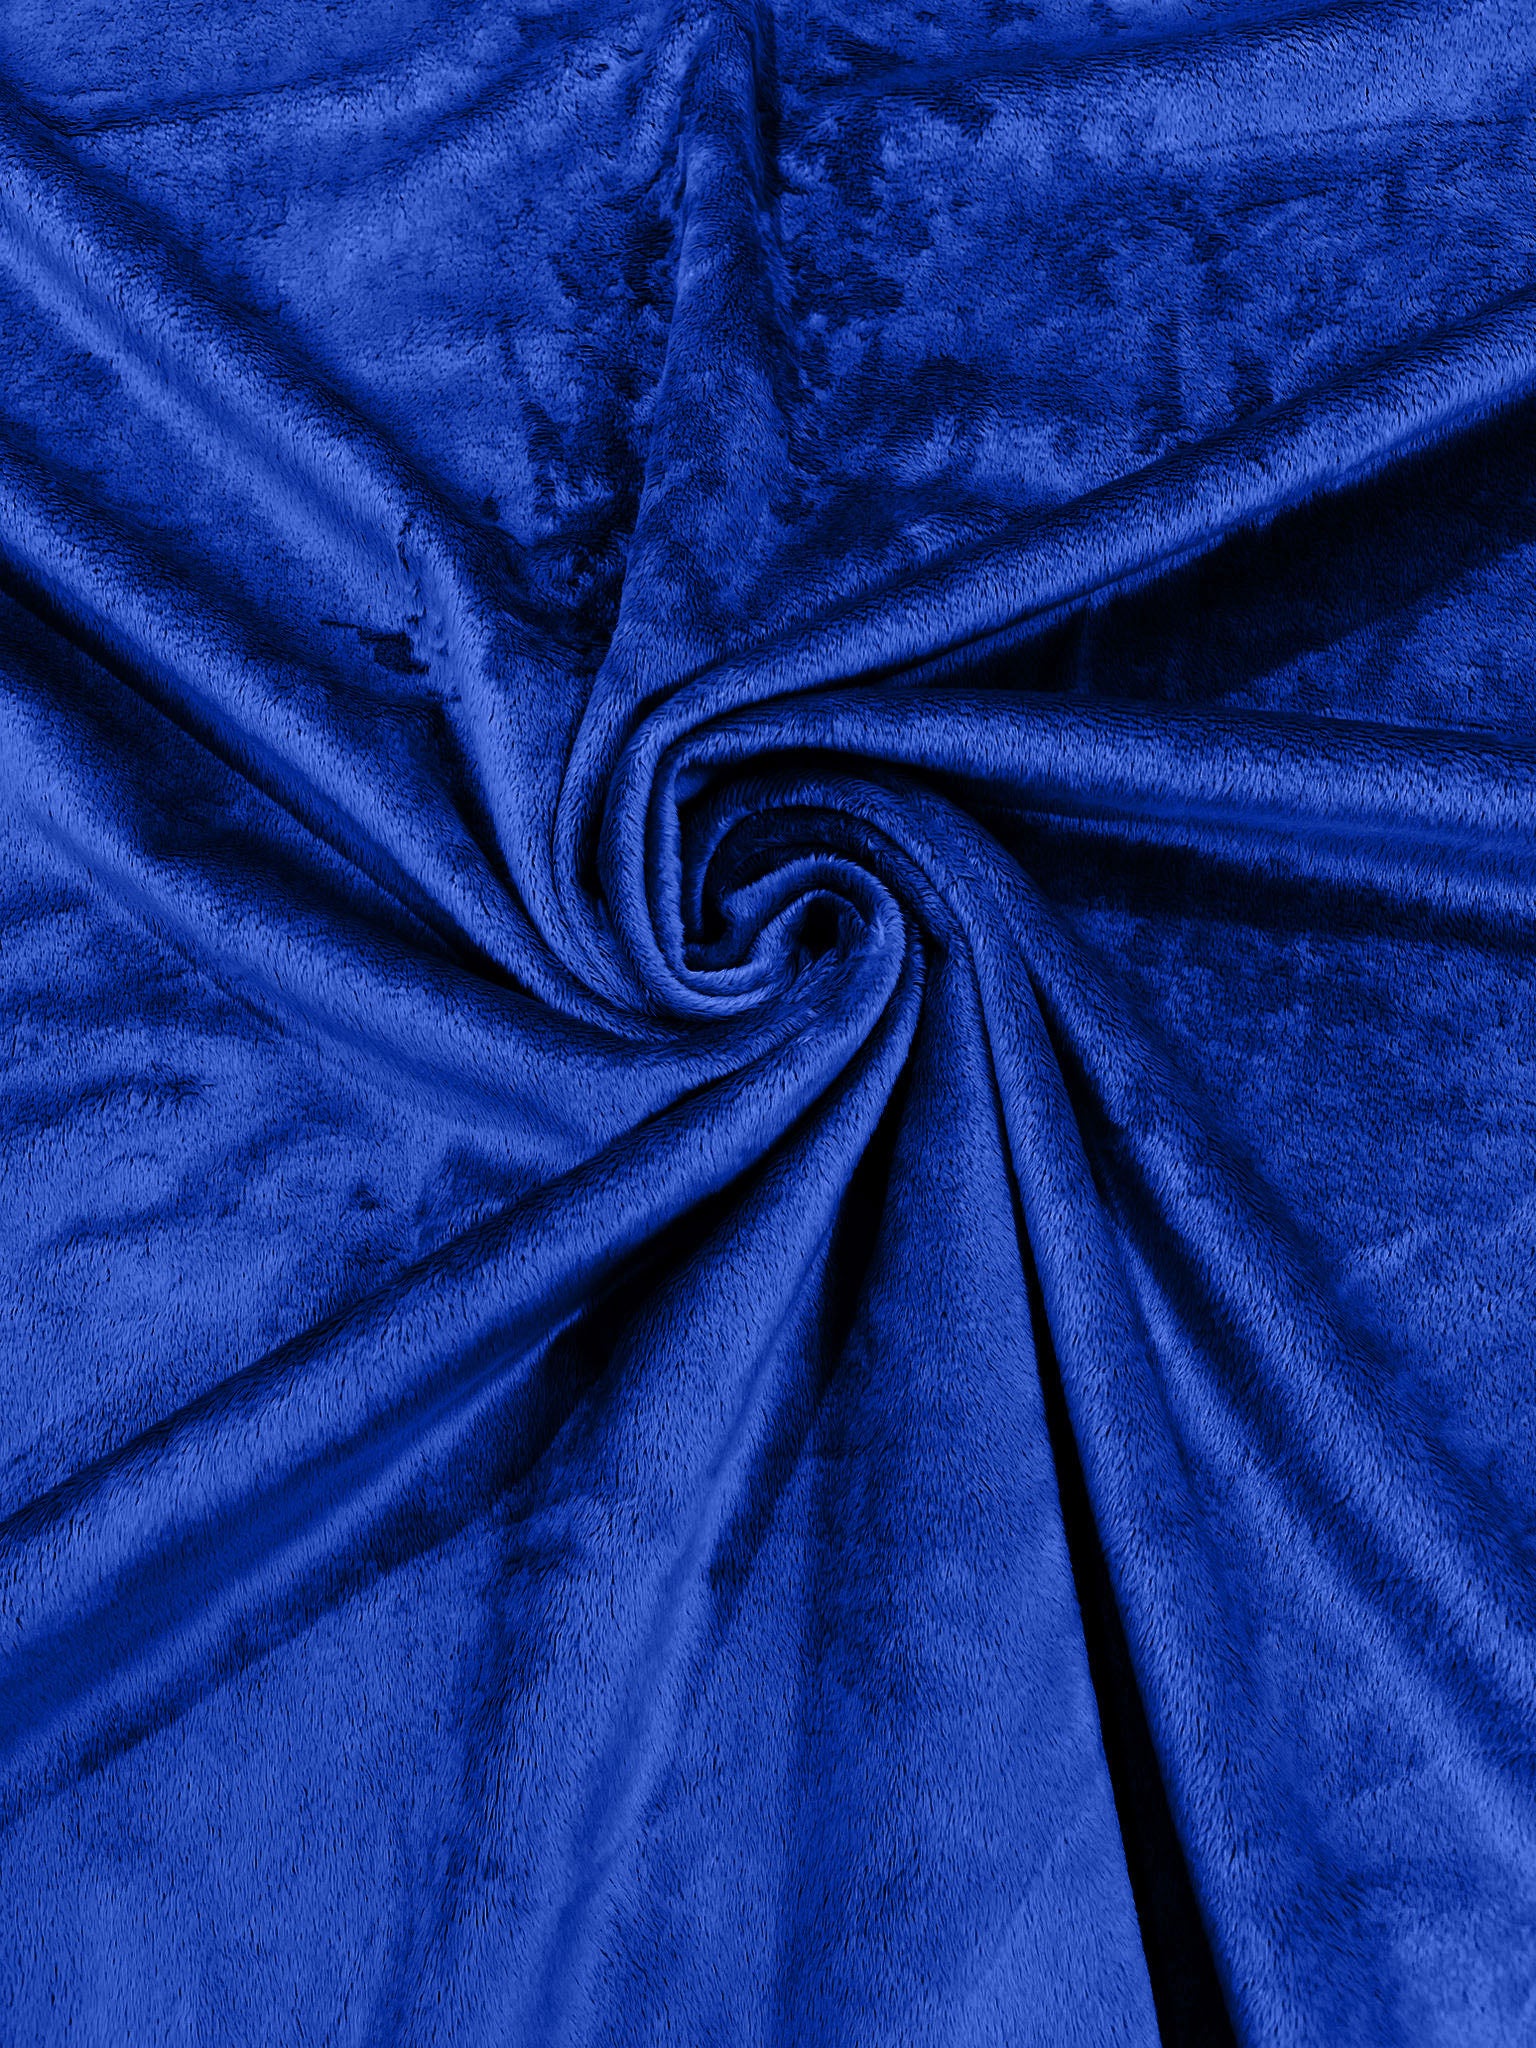 Royal Blue Minky Smooth Soft Solid Plush Faux Fake Fur Fabric Polyester- Sold by the yard.